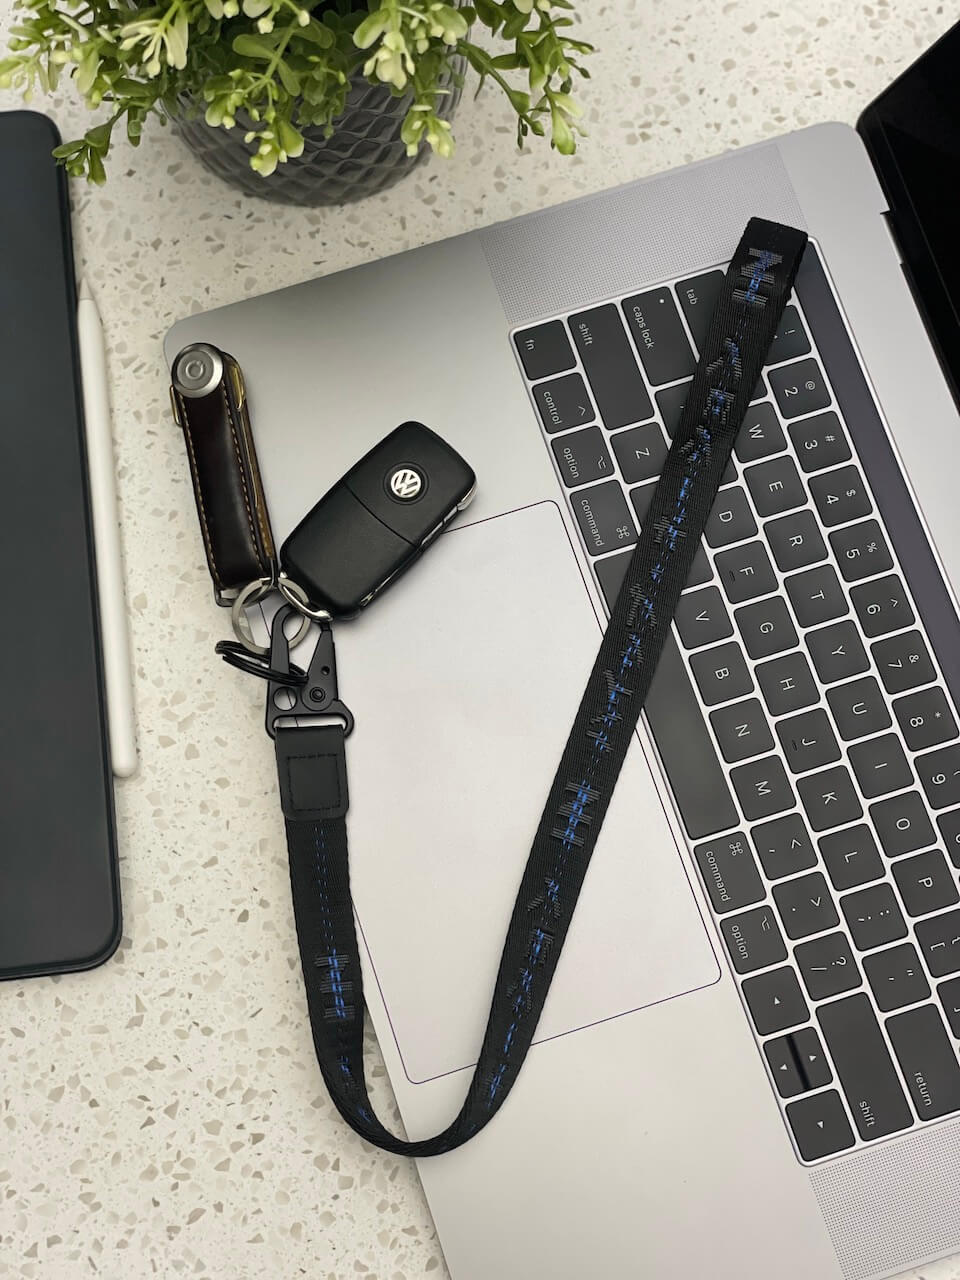 Sapphire Striped Lanyard - Hype Nation